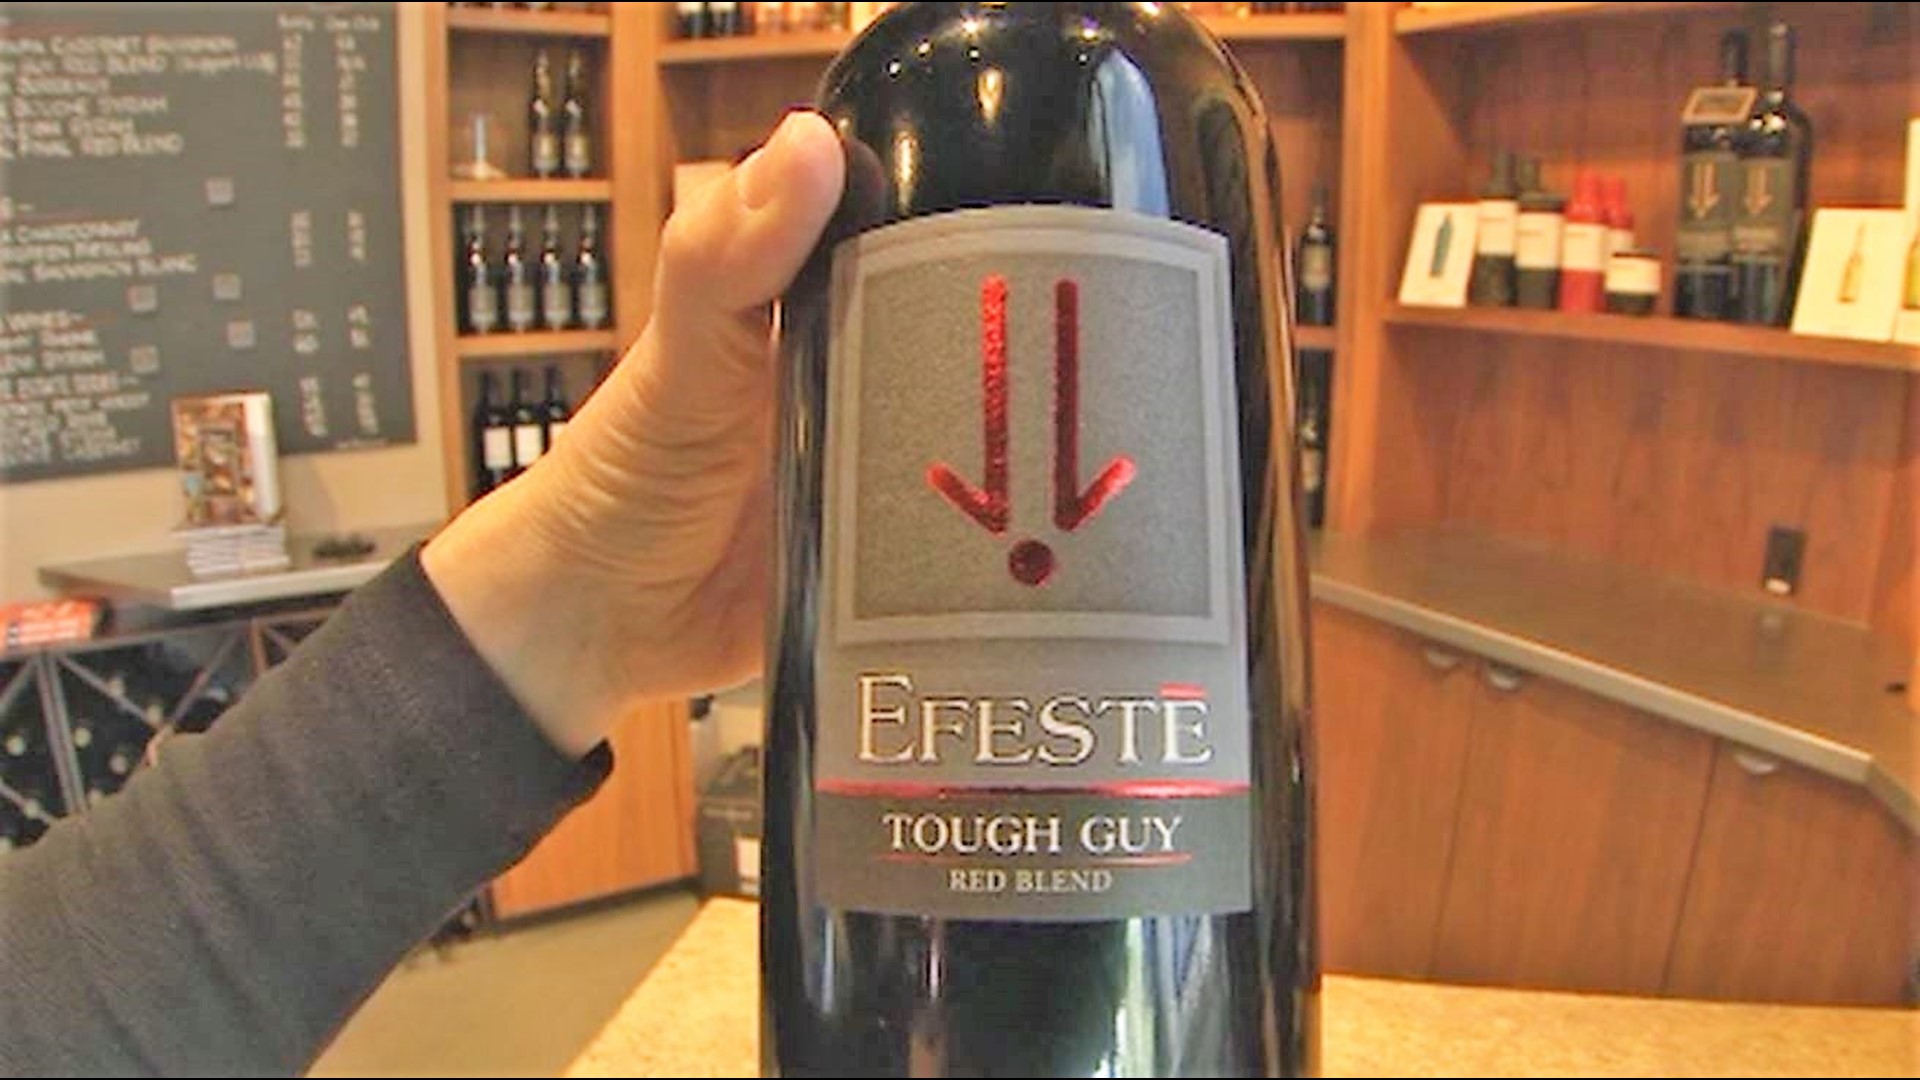 The upcoming Auction of Washington Wines is just one of the ways EFESTĒ gives back